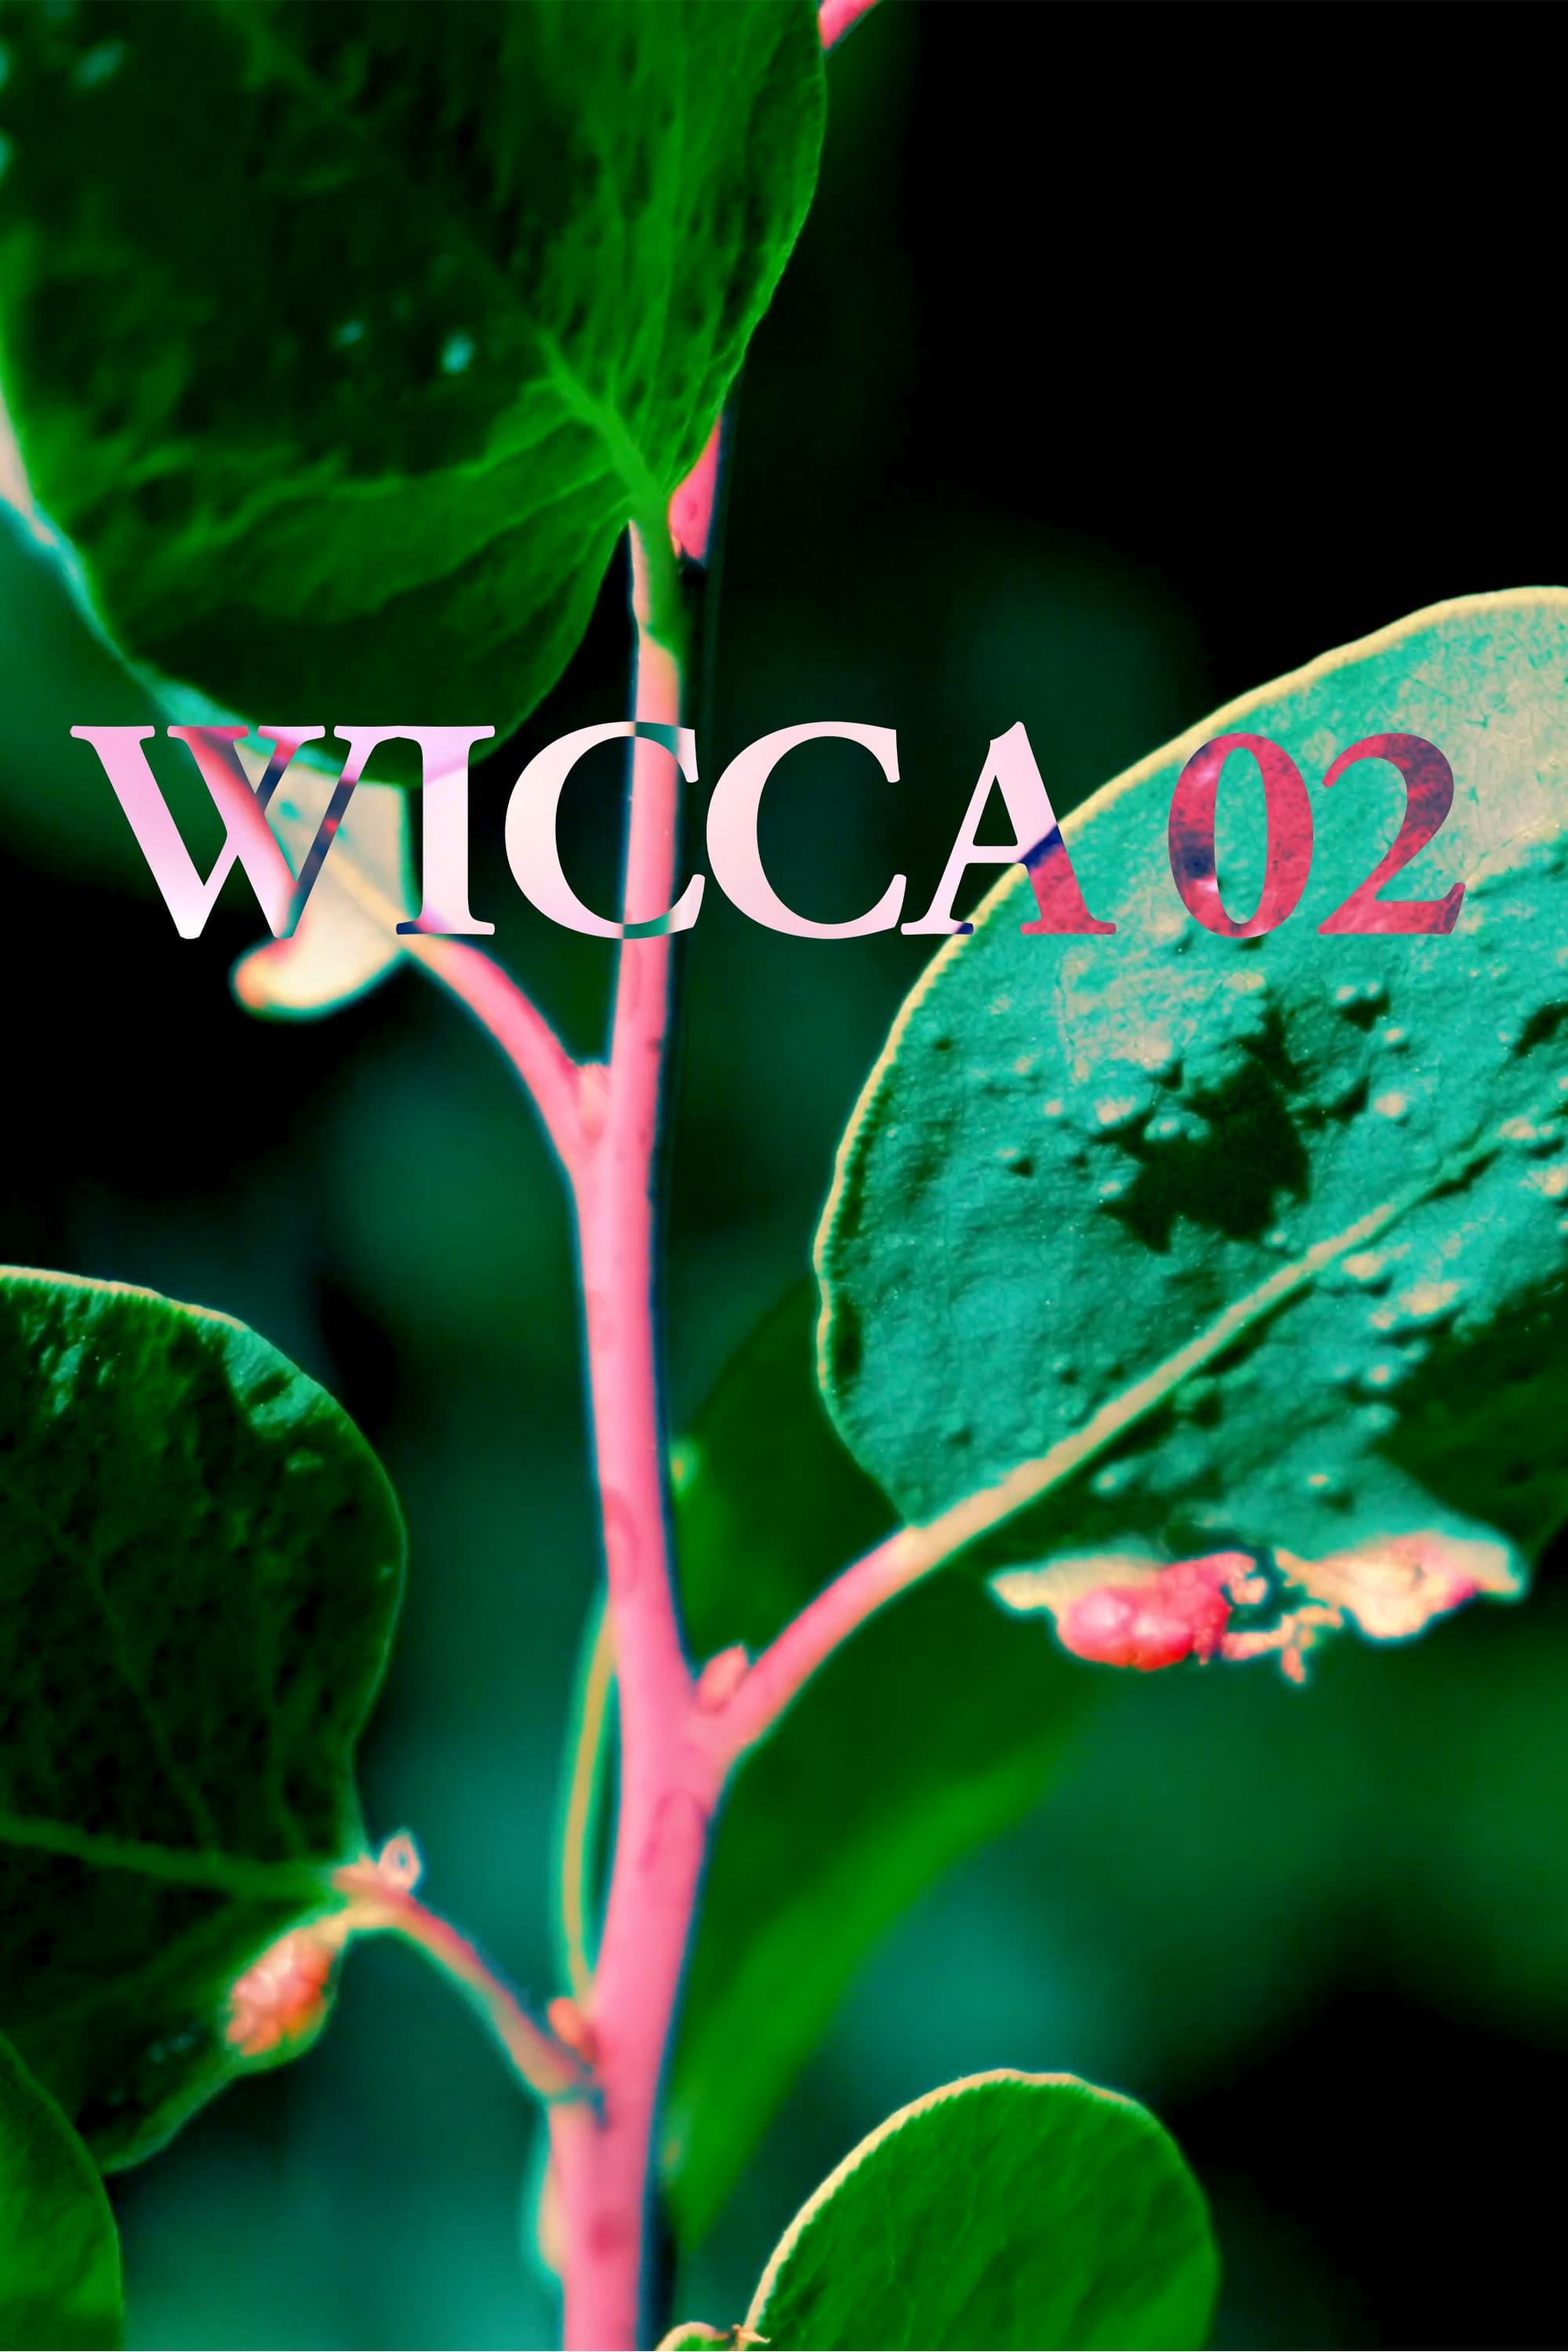 WICCA_02 poster